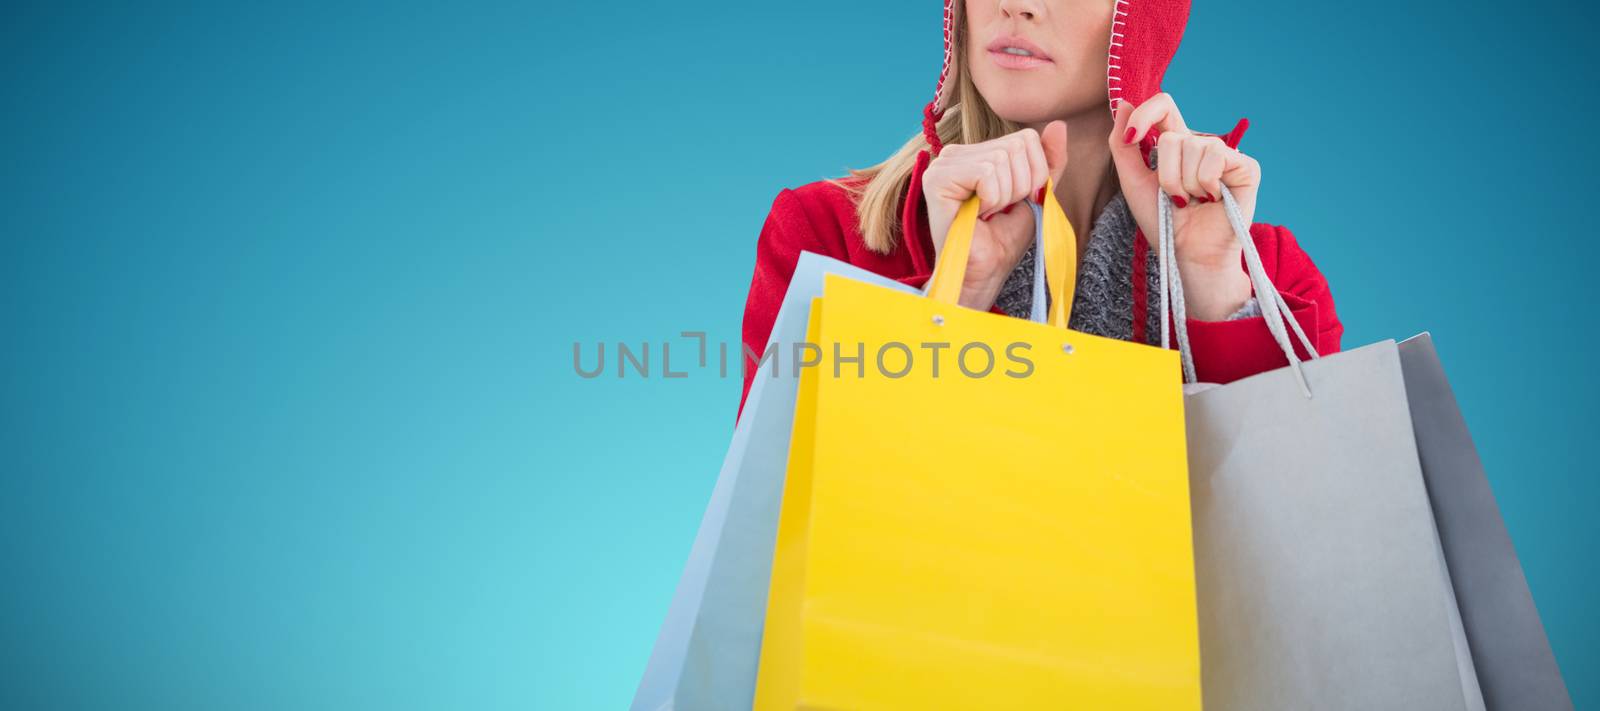 Blonde in winter clothes holding shopping bags against abstract blue background